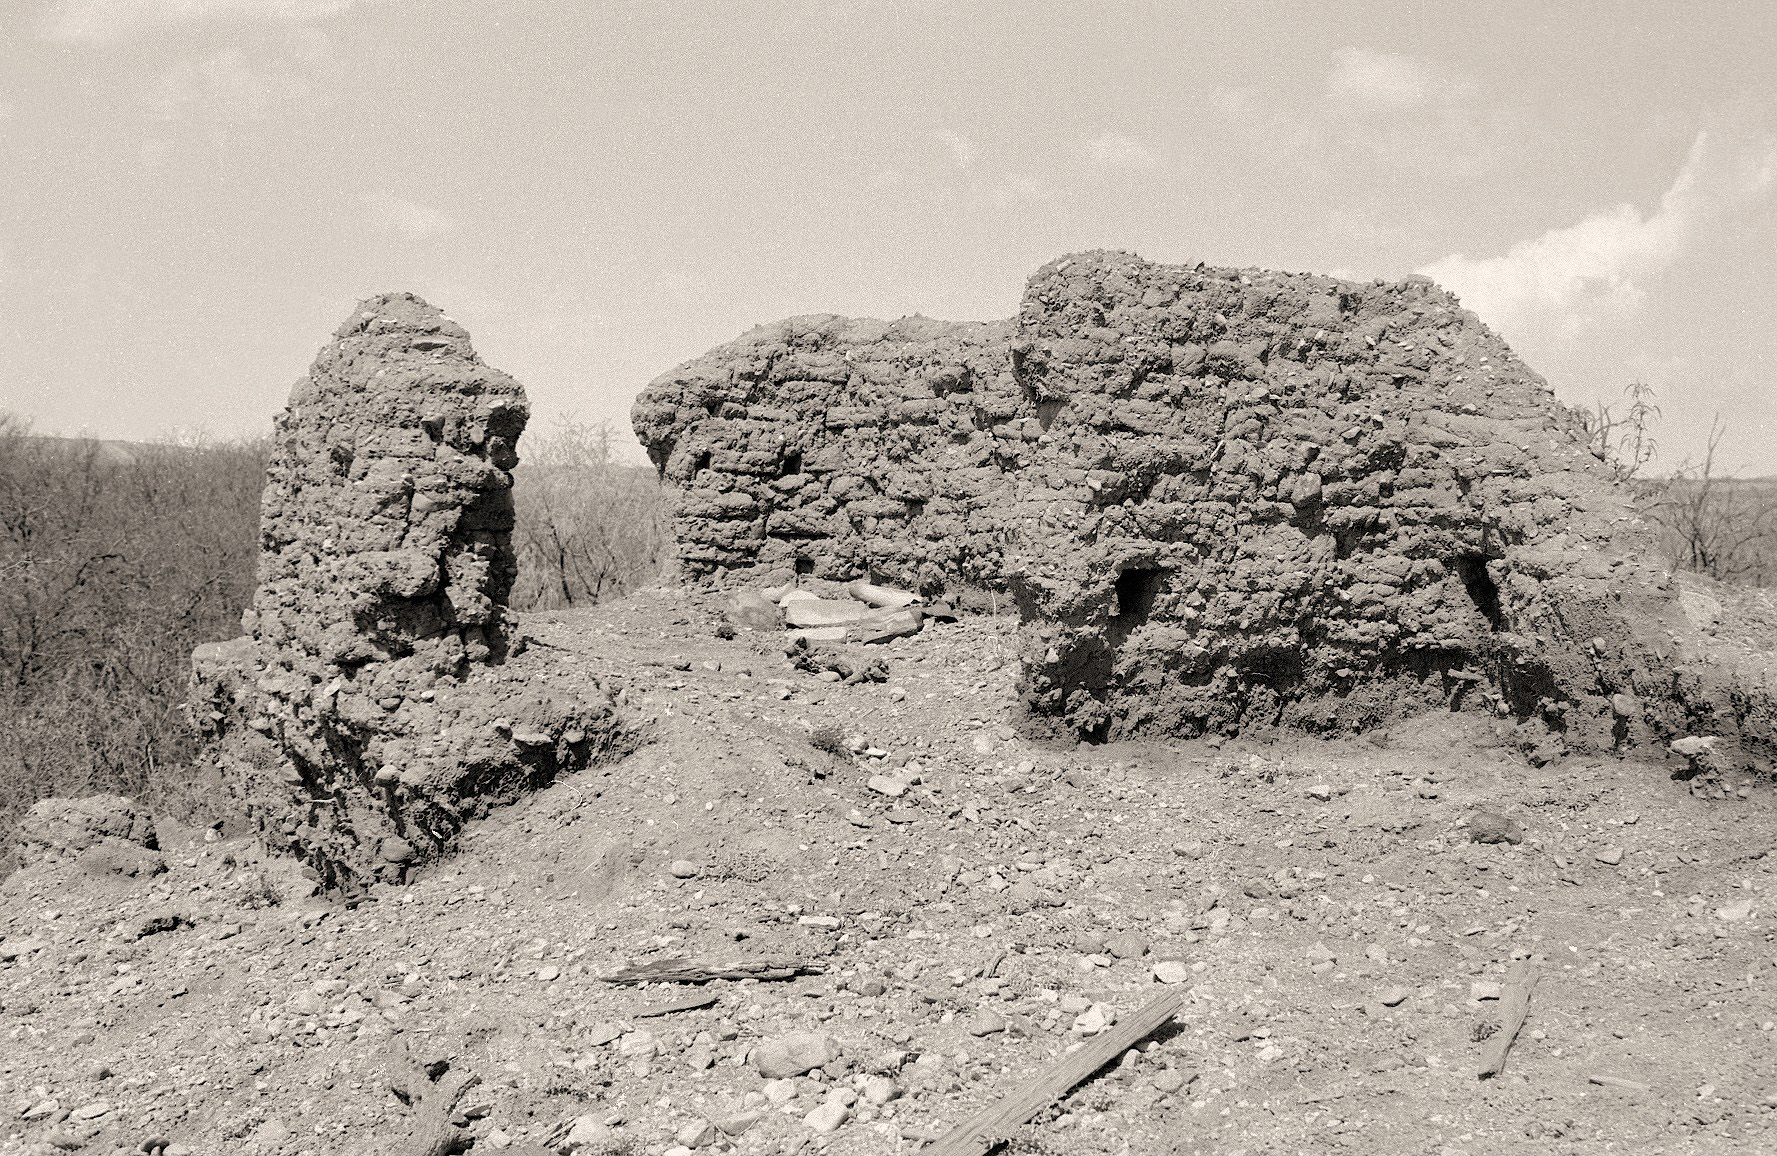 The San Pedro River Quiburi ruin is located just north of Fairbank, Arizona. It was the last Spanish outpost located in Southern Arizona. Photo by Shegoi, 1964. View full size.